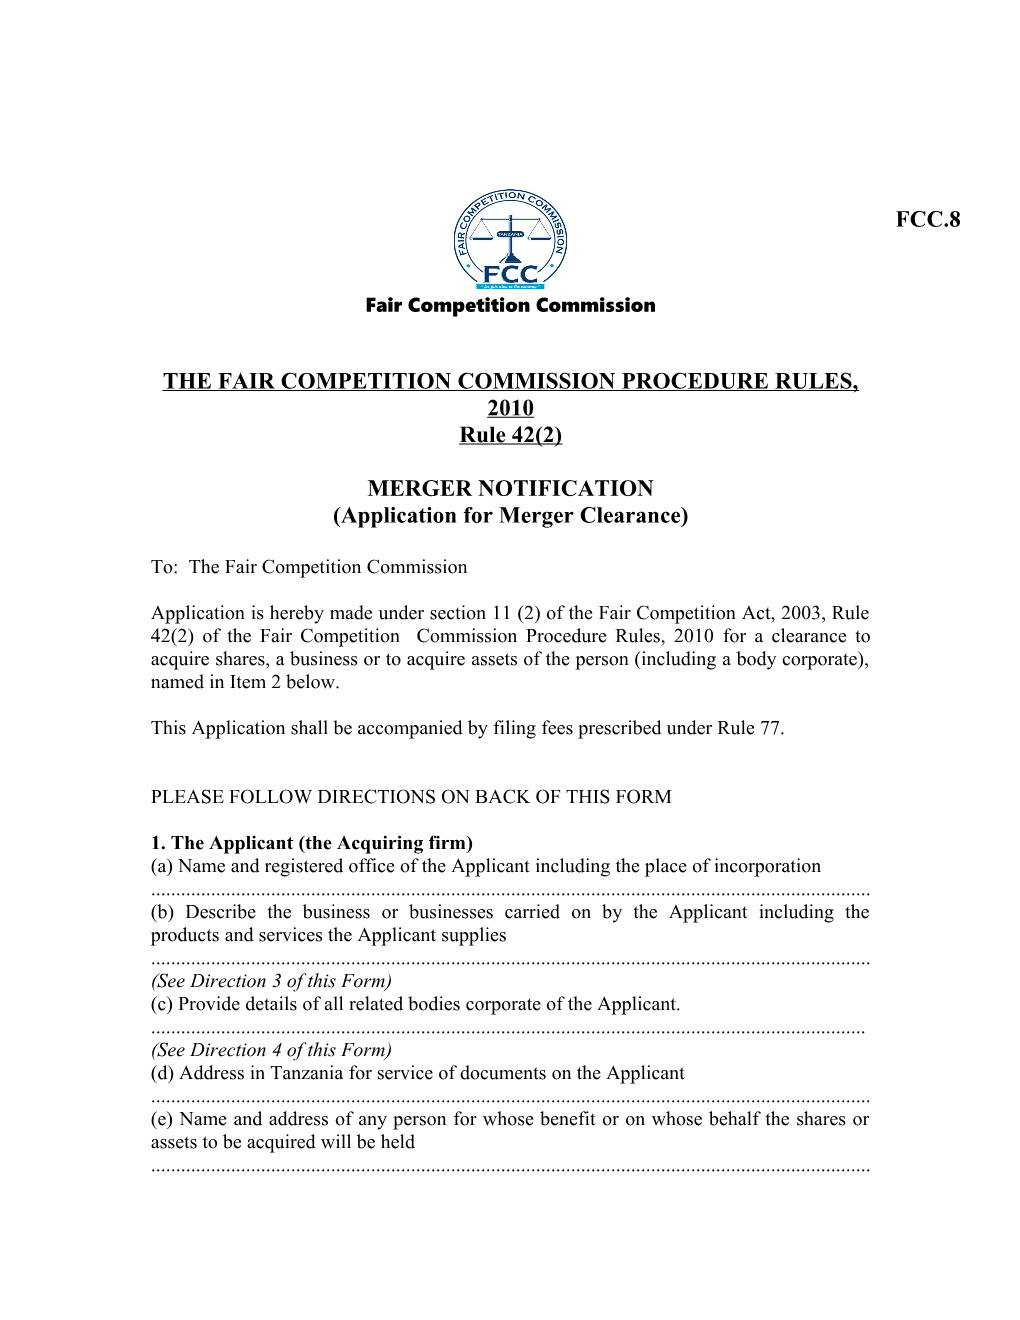 The Fair Competition Commission Procedure Rules, 2010